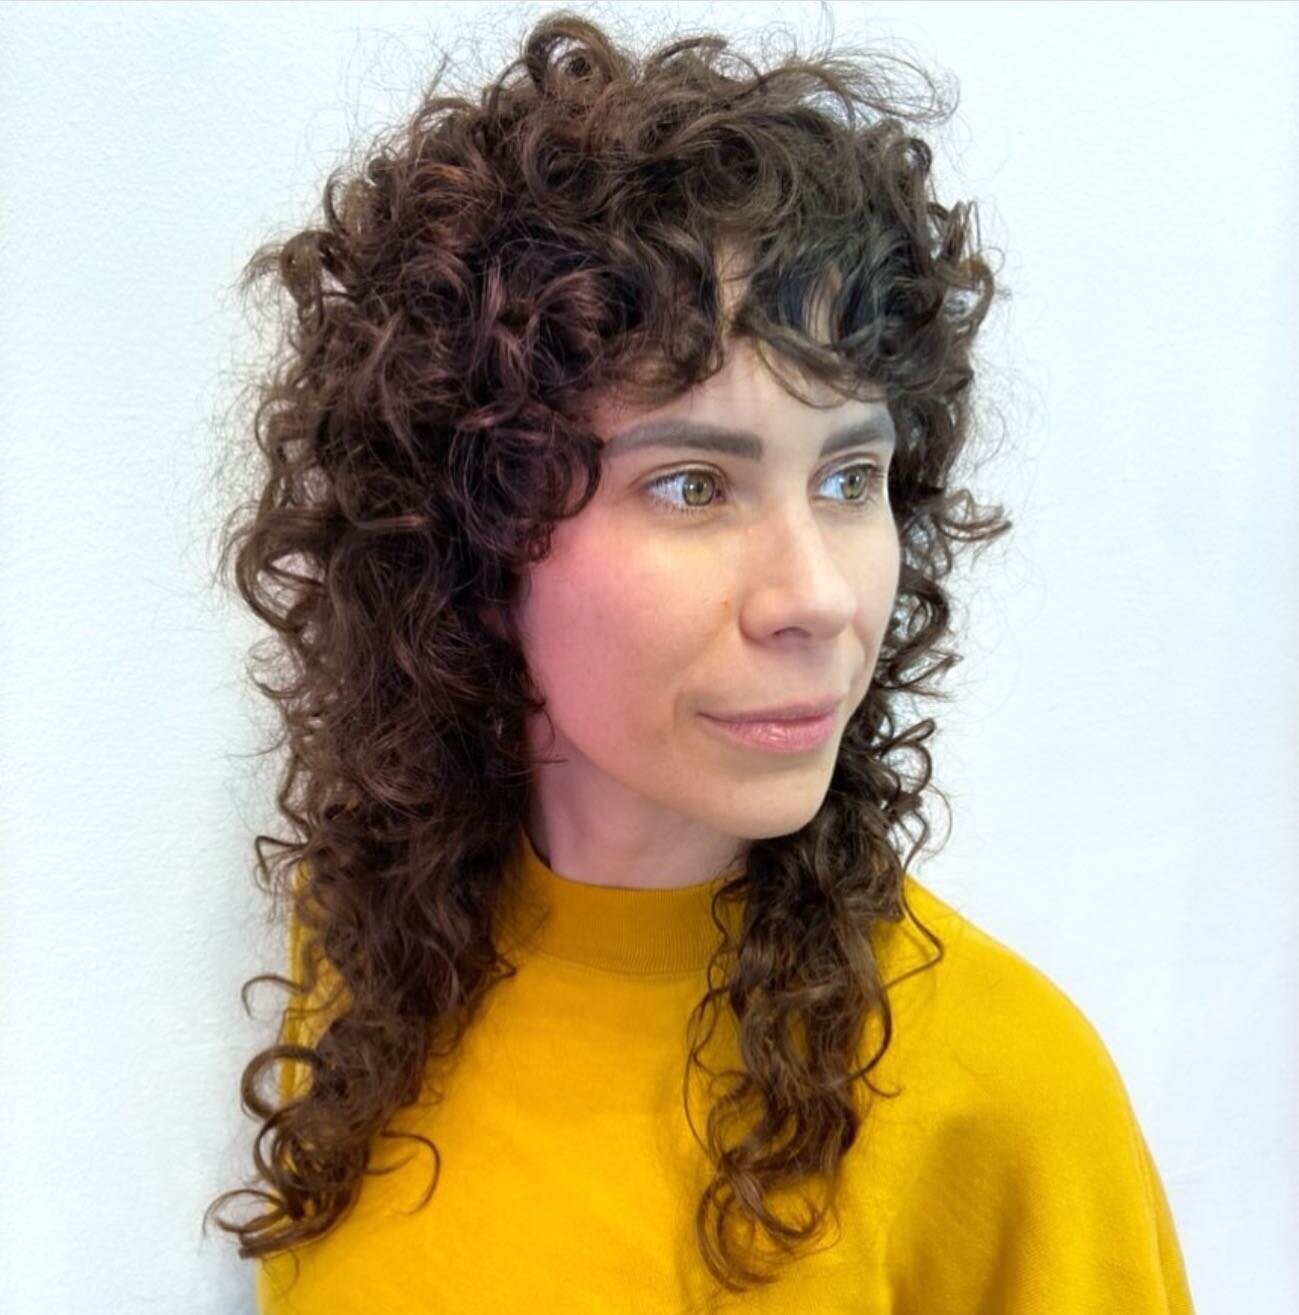 Repost alert: image and text via @gildedrazors , mentions @afterworldorganics as &ldquo;my favorite brand for soft beautiful curls&rdquo; -gildedrazors

Cleansing for this look with hair glow and styling with hair healer and moisture lock!!

#curlyha